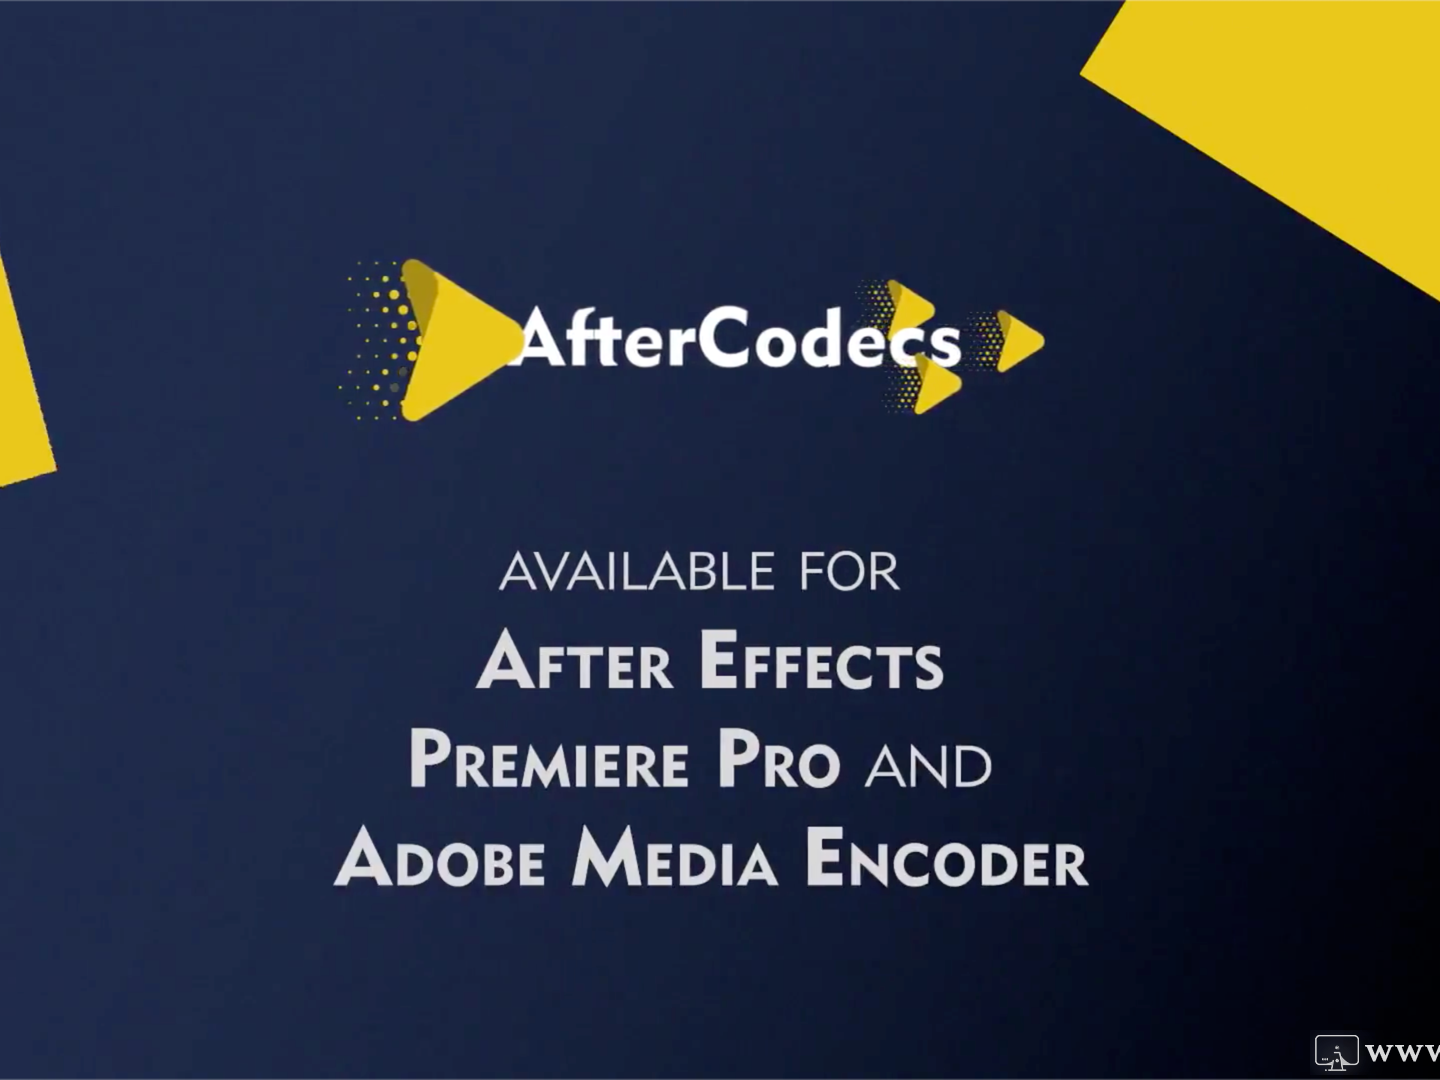 AfterCodecs 1.10.15 instal the new version for mac